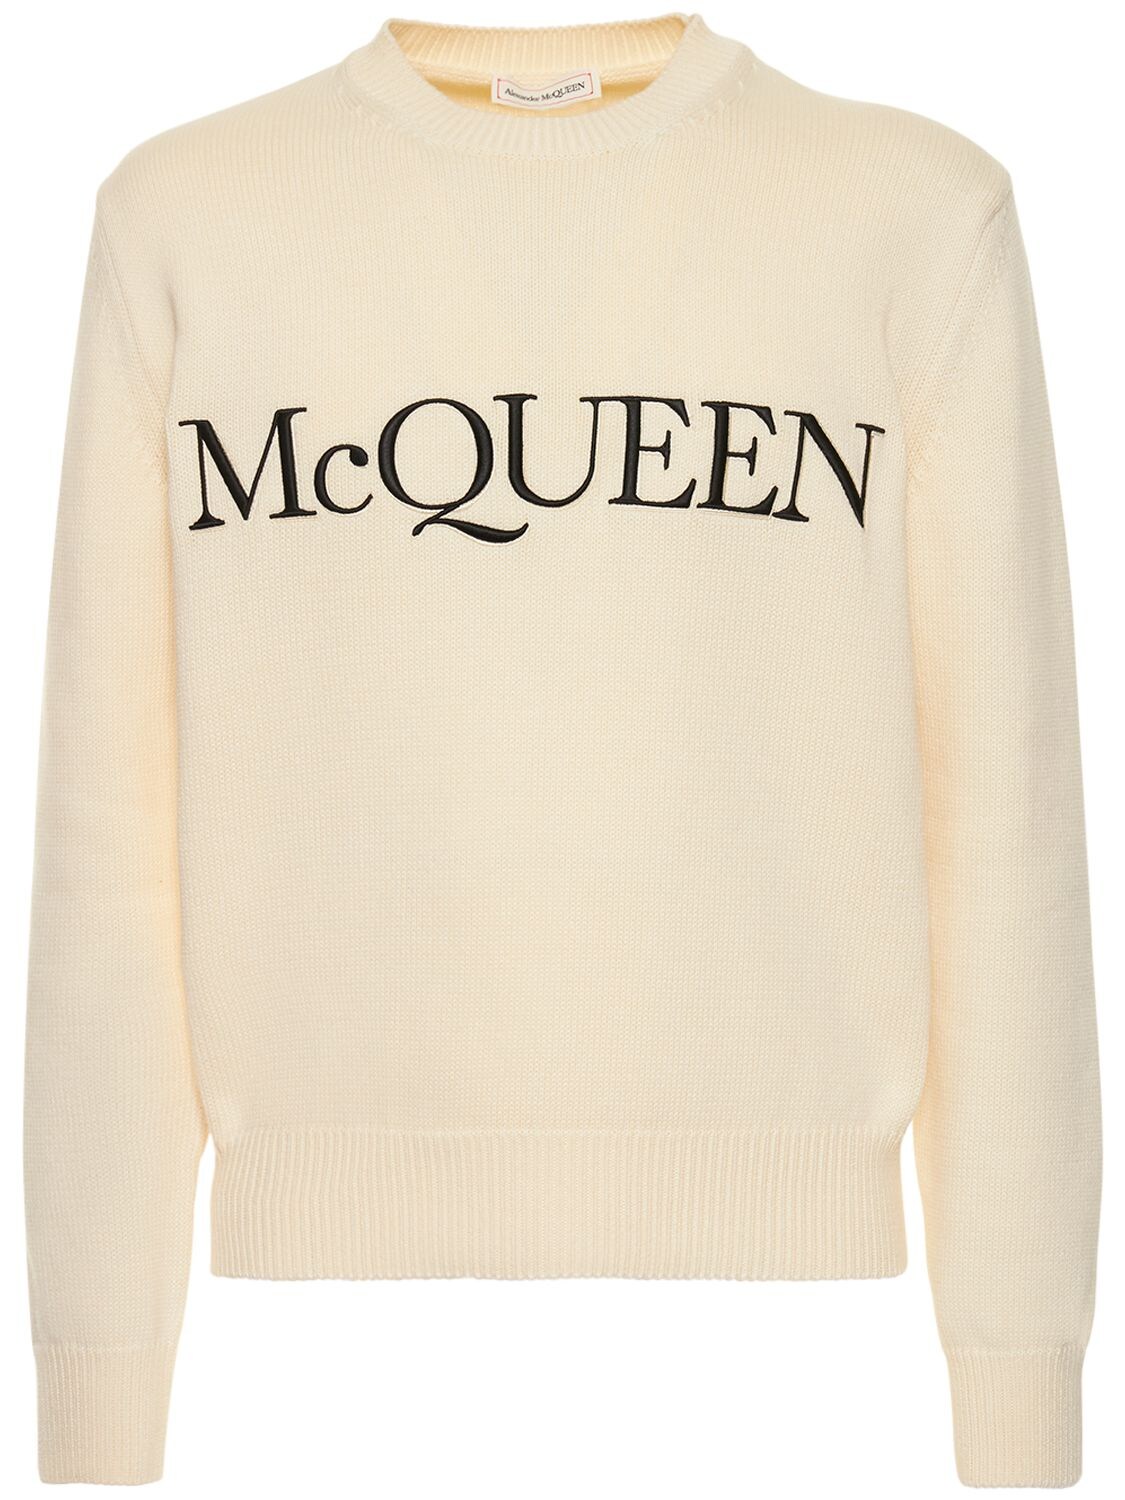 ALEXANDER MCQUEEN LOGO EMBROIDERY COTTON KNIT SWEATER